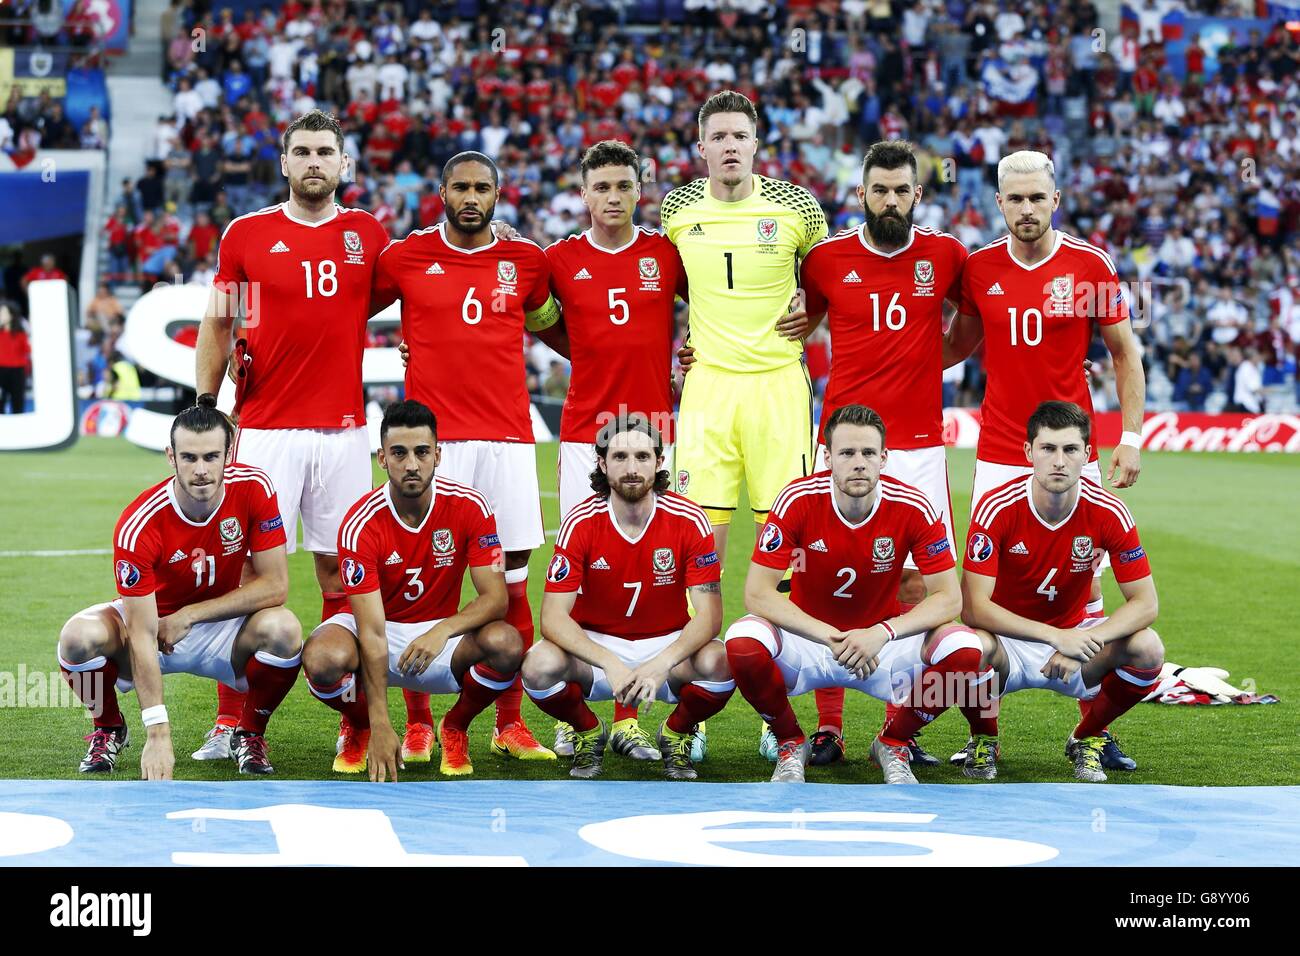 Wales Team Group Line Up Wal Jun 16 Football Soccer Uefa Euro 16 Group Stage